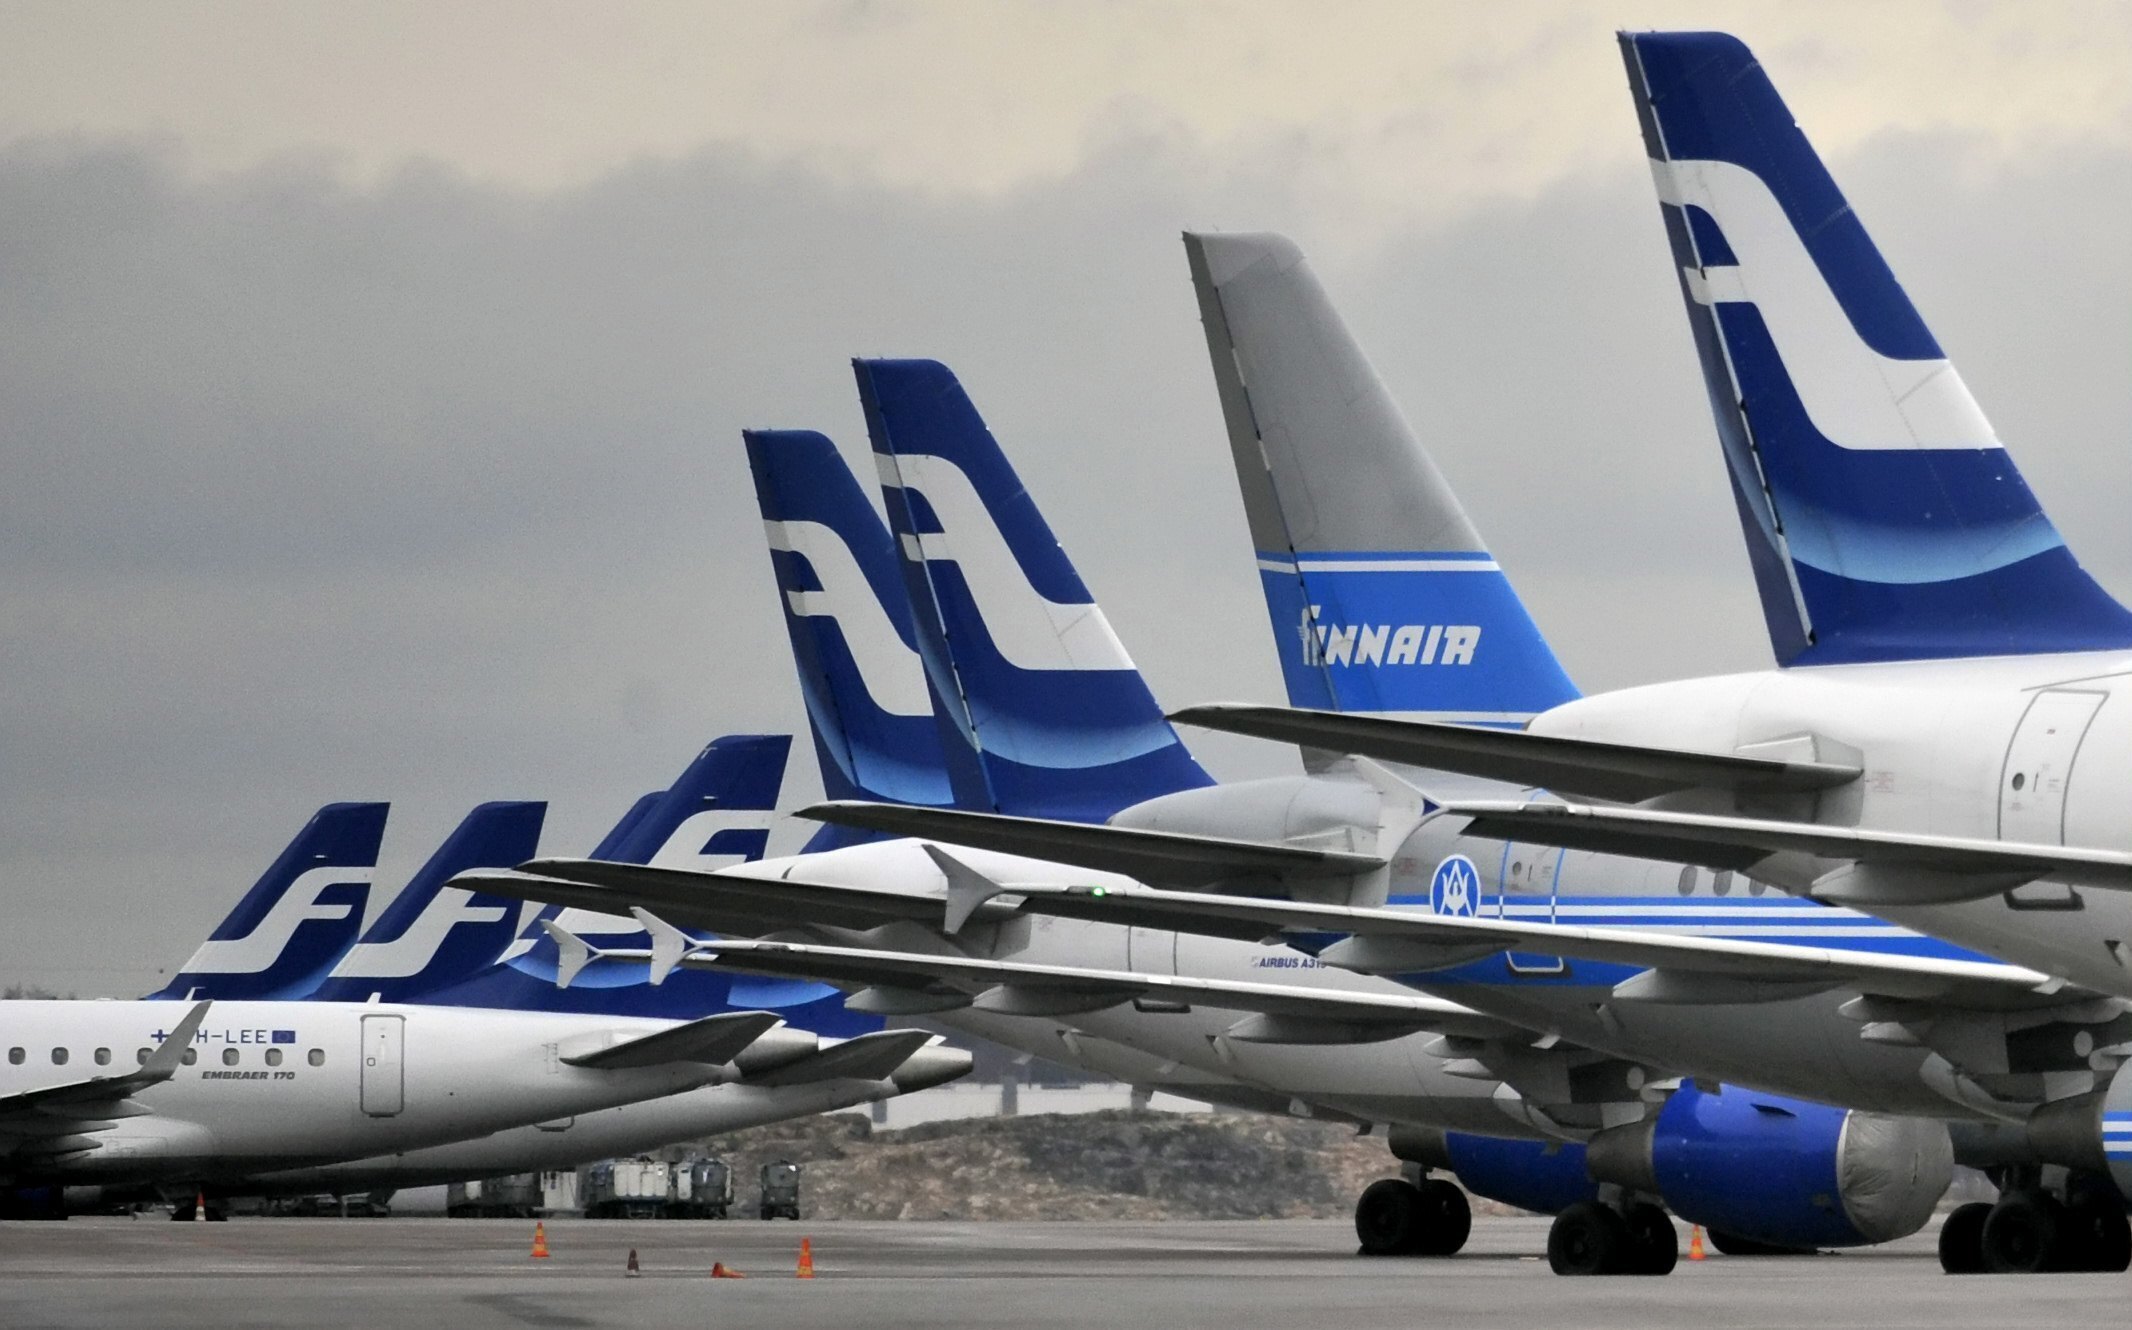 Passenger planes of the Finnish national airline carrier, Finnair, sit on the tarmac at Helsinki Airport in 2009.